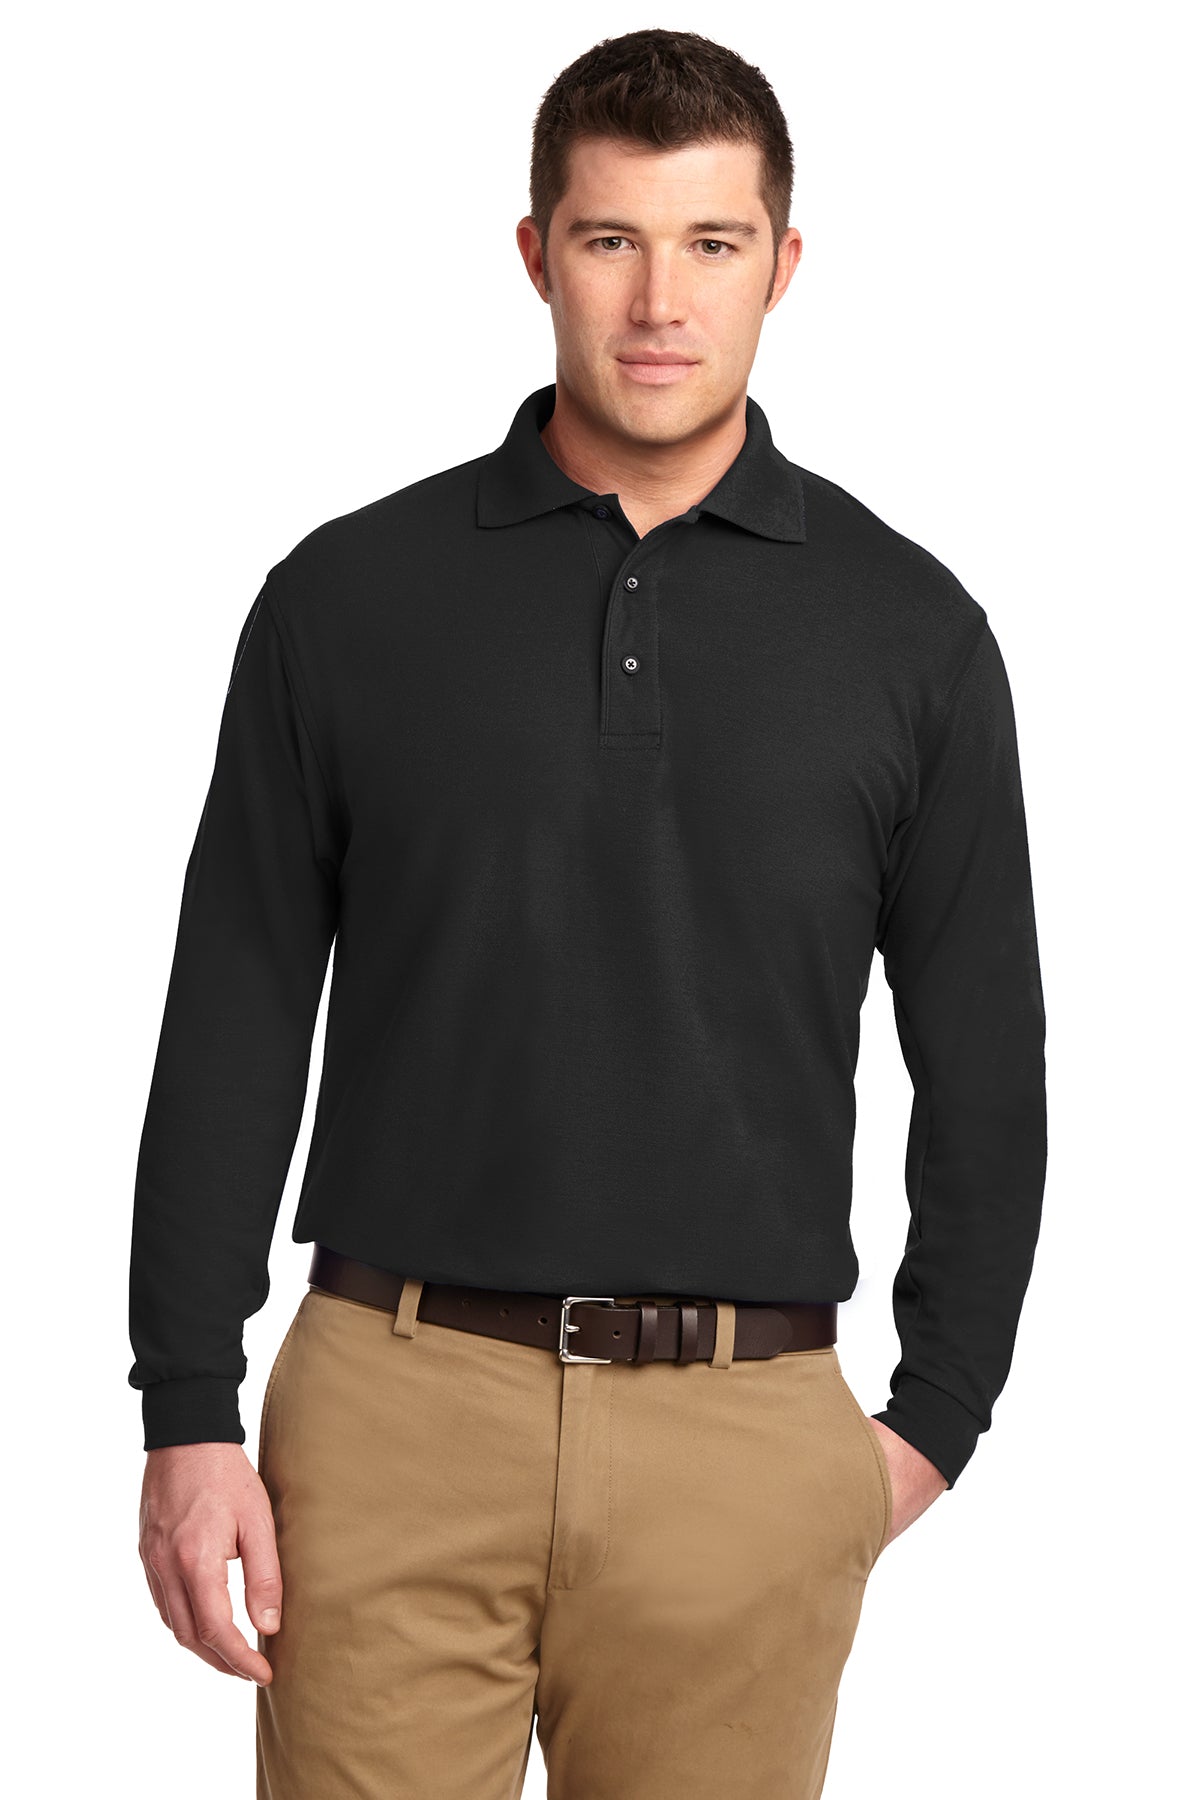 Windsor - ADULT Long Sleeve Polo - BLACK (K500LS) - Southern Grace Creations